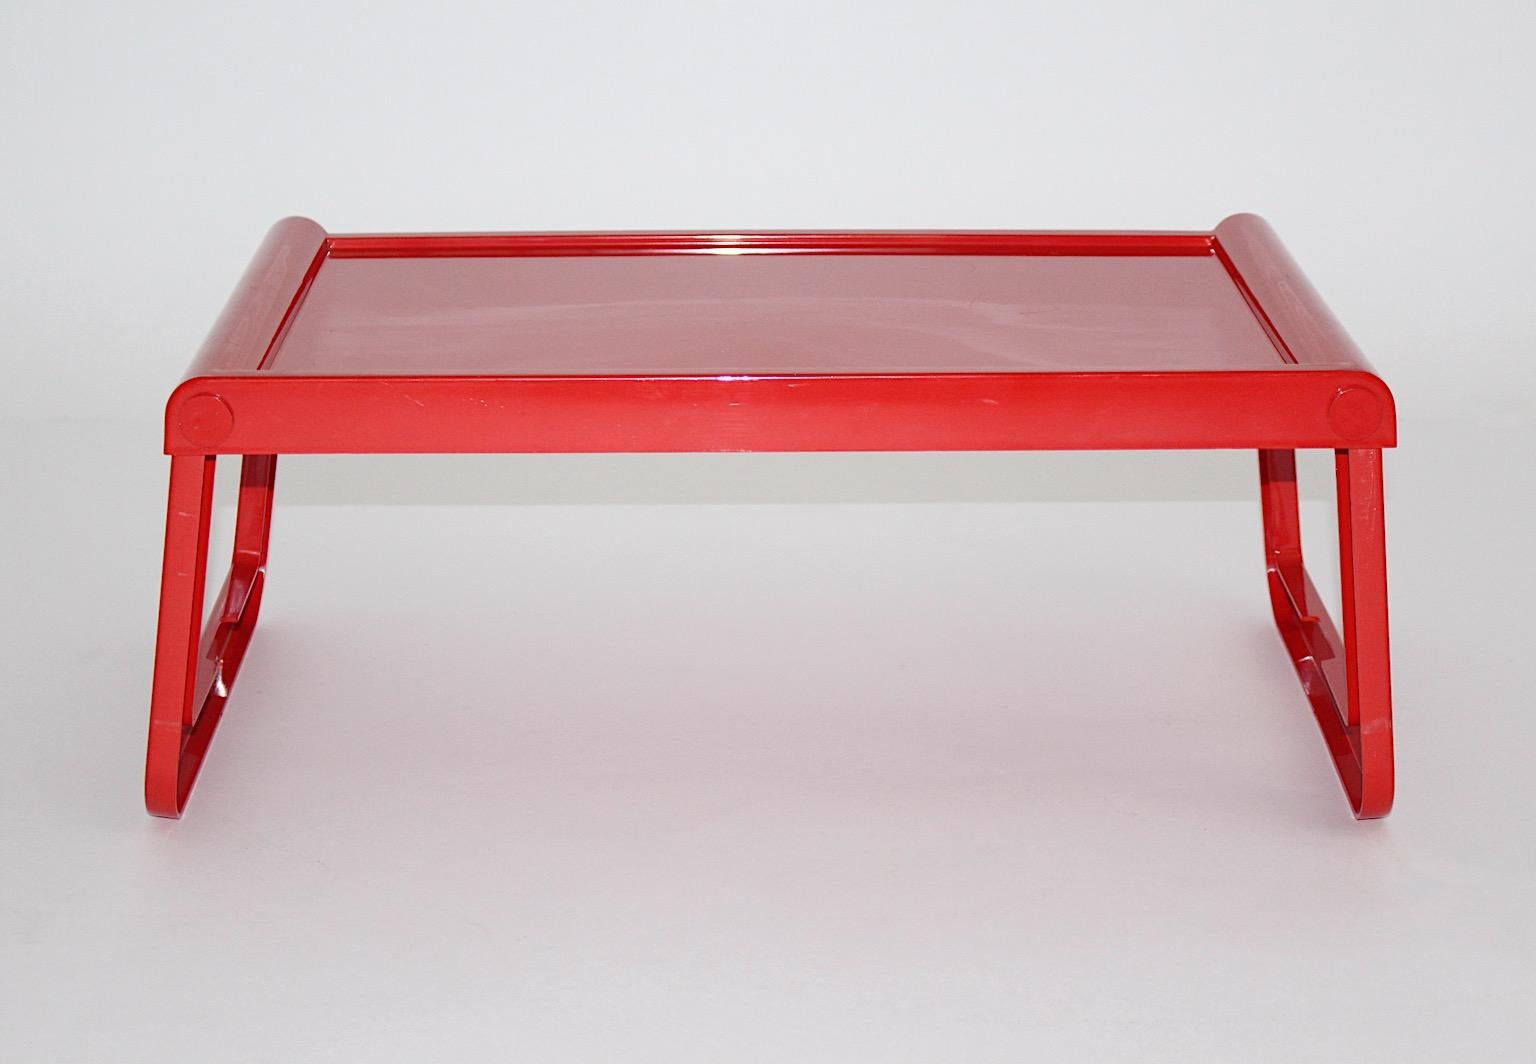 20th Century Red Plastic Space Age Vintage Tray Bed Table Luigi Massoni Guzzini, 1970s, Italy For Sale